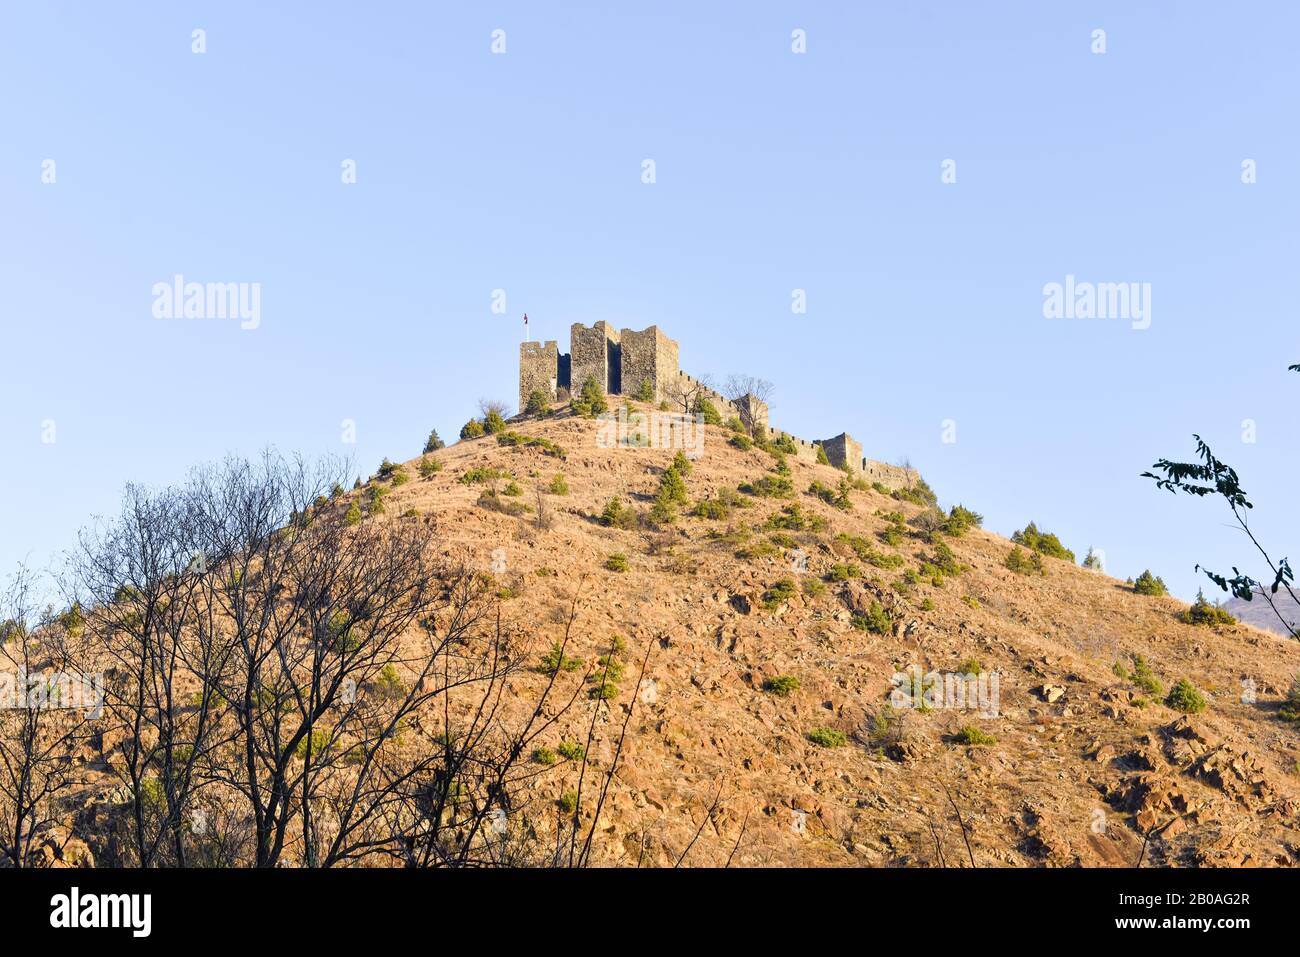 Brighter image of Maglic castle standing on top of the hill near Kraljevo in Serbia during the sunny autumn day Stock Photo